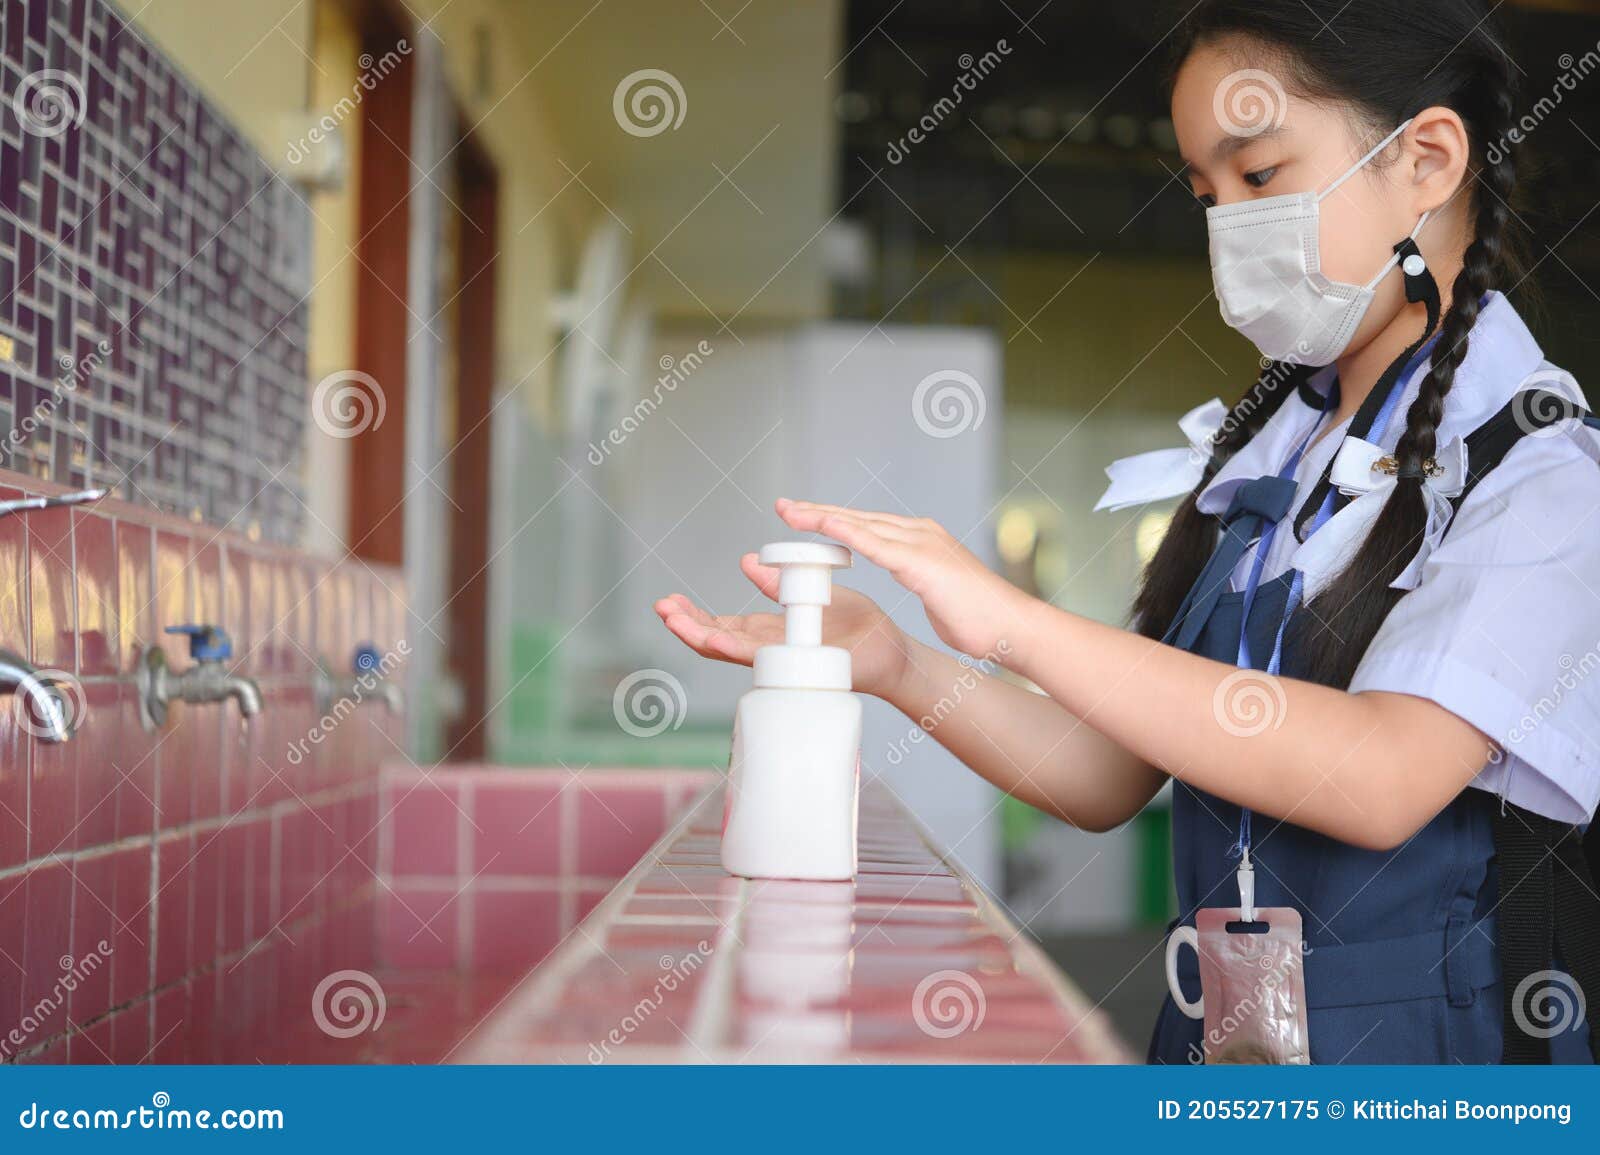 asian kid girl student washing hands and wearing masks at school. reopen school from lockdown. covid-19 coronavirus pandemic. new